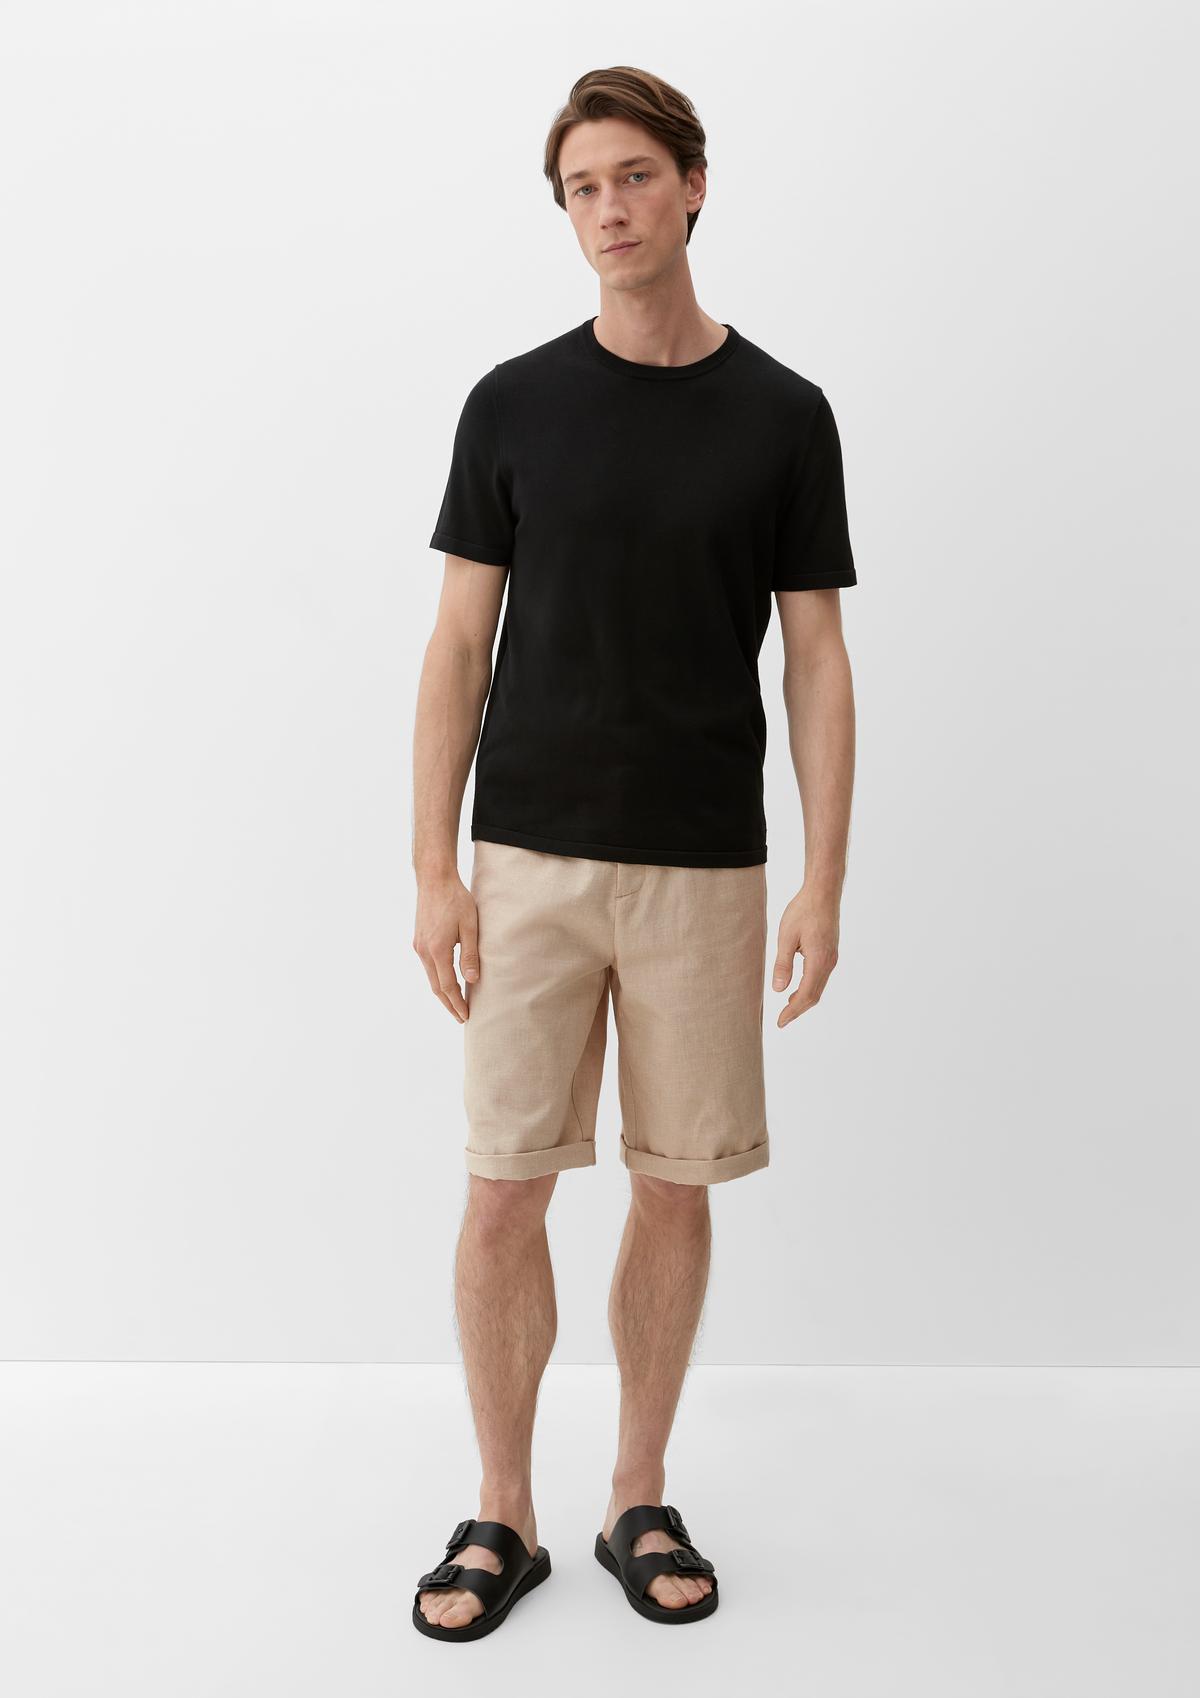 Bermuda shorts made of linen and cotton